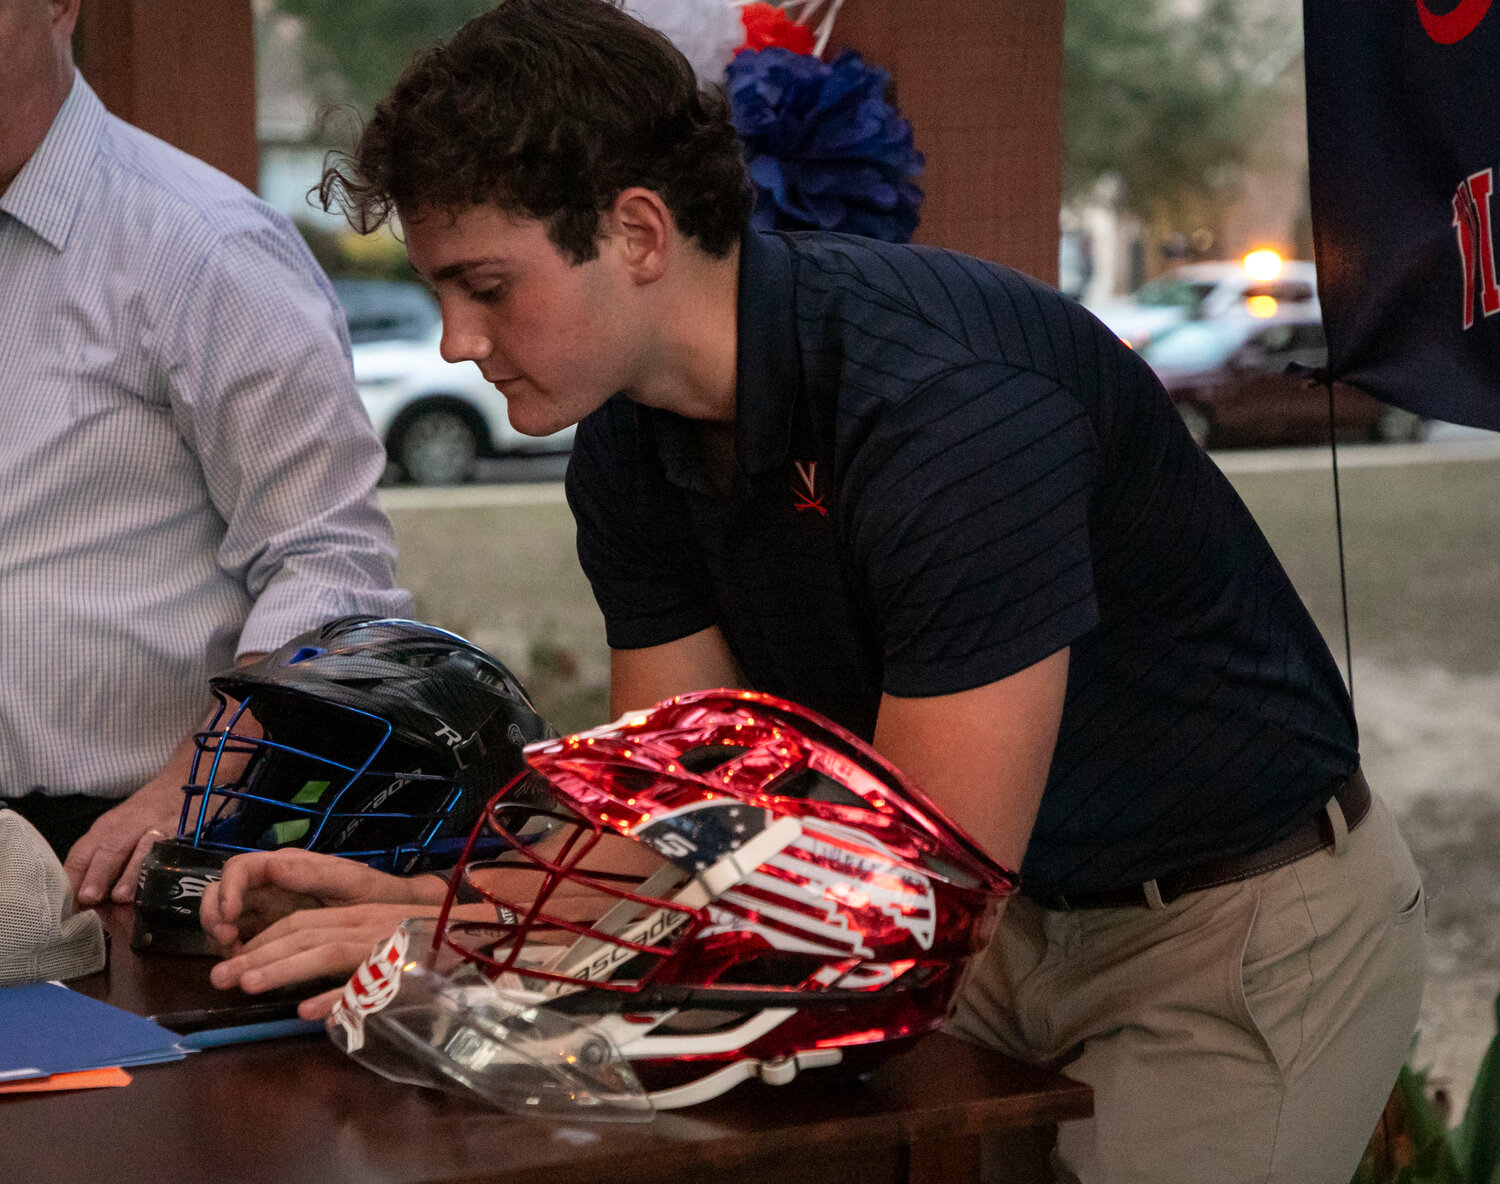 Daphne senior Troy Capstraw prepares for his signing ceremony on Wednesday, Nov. 8, where he put pen to paper and locked in his commitment to play lacrosse at Virginia. Also a member of National Honor Society and the Daphne Junior City Council, Capstraw is also a state-qualified diver for the Trojans.